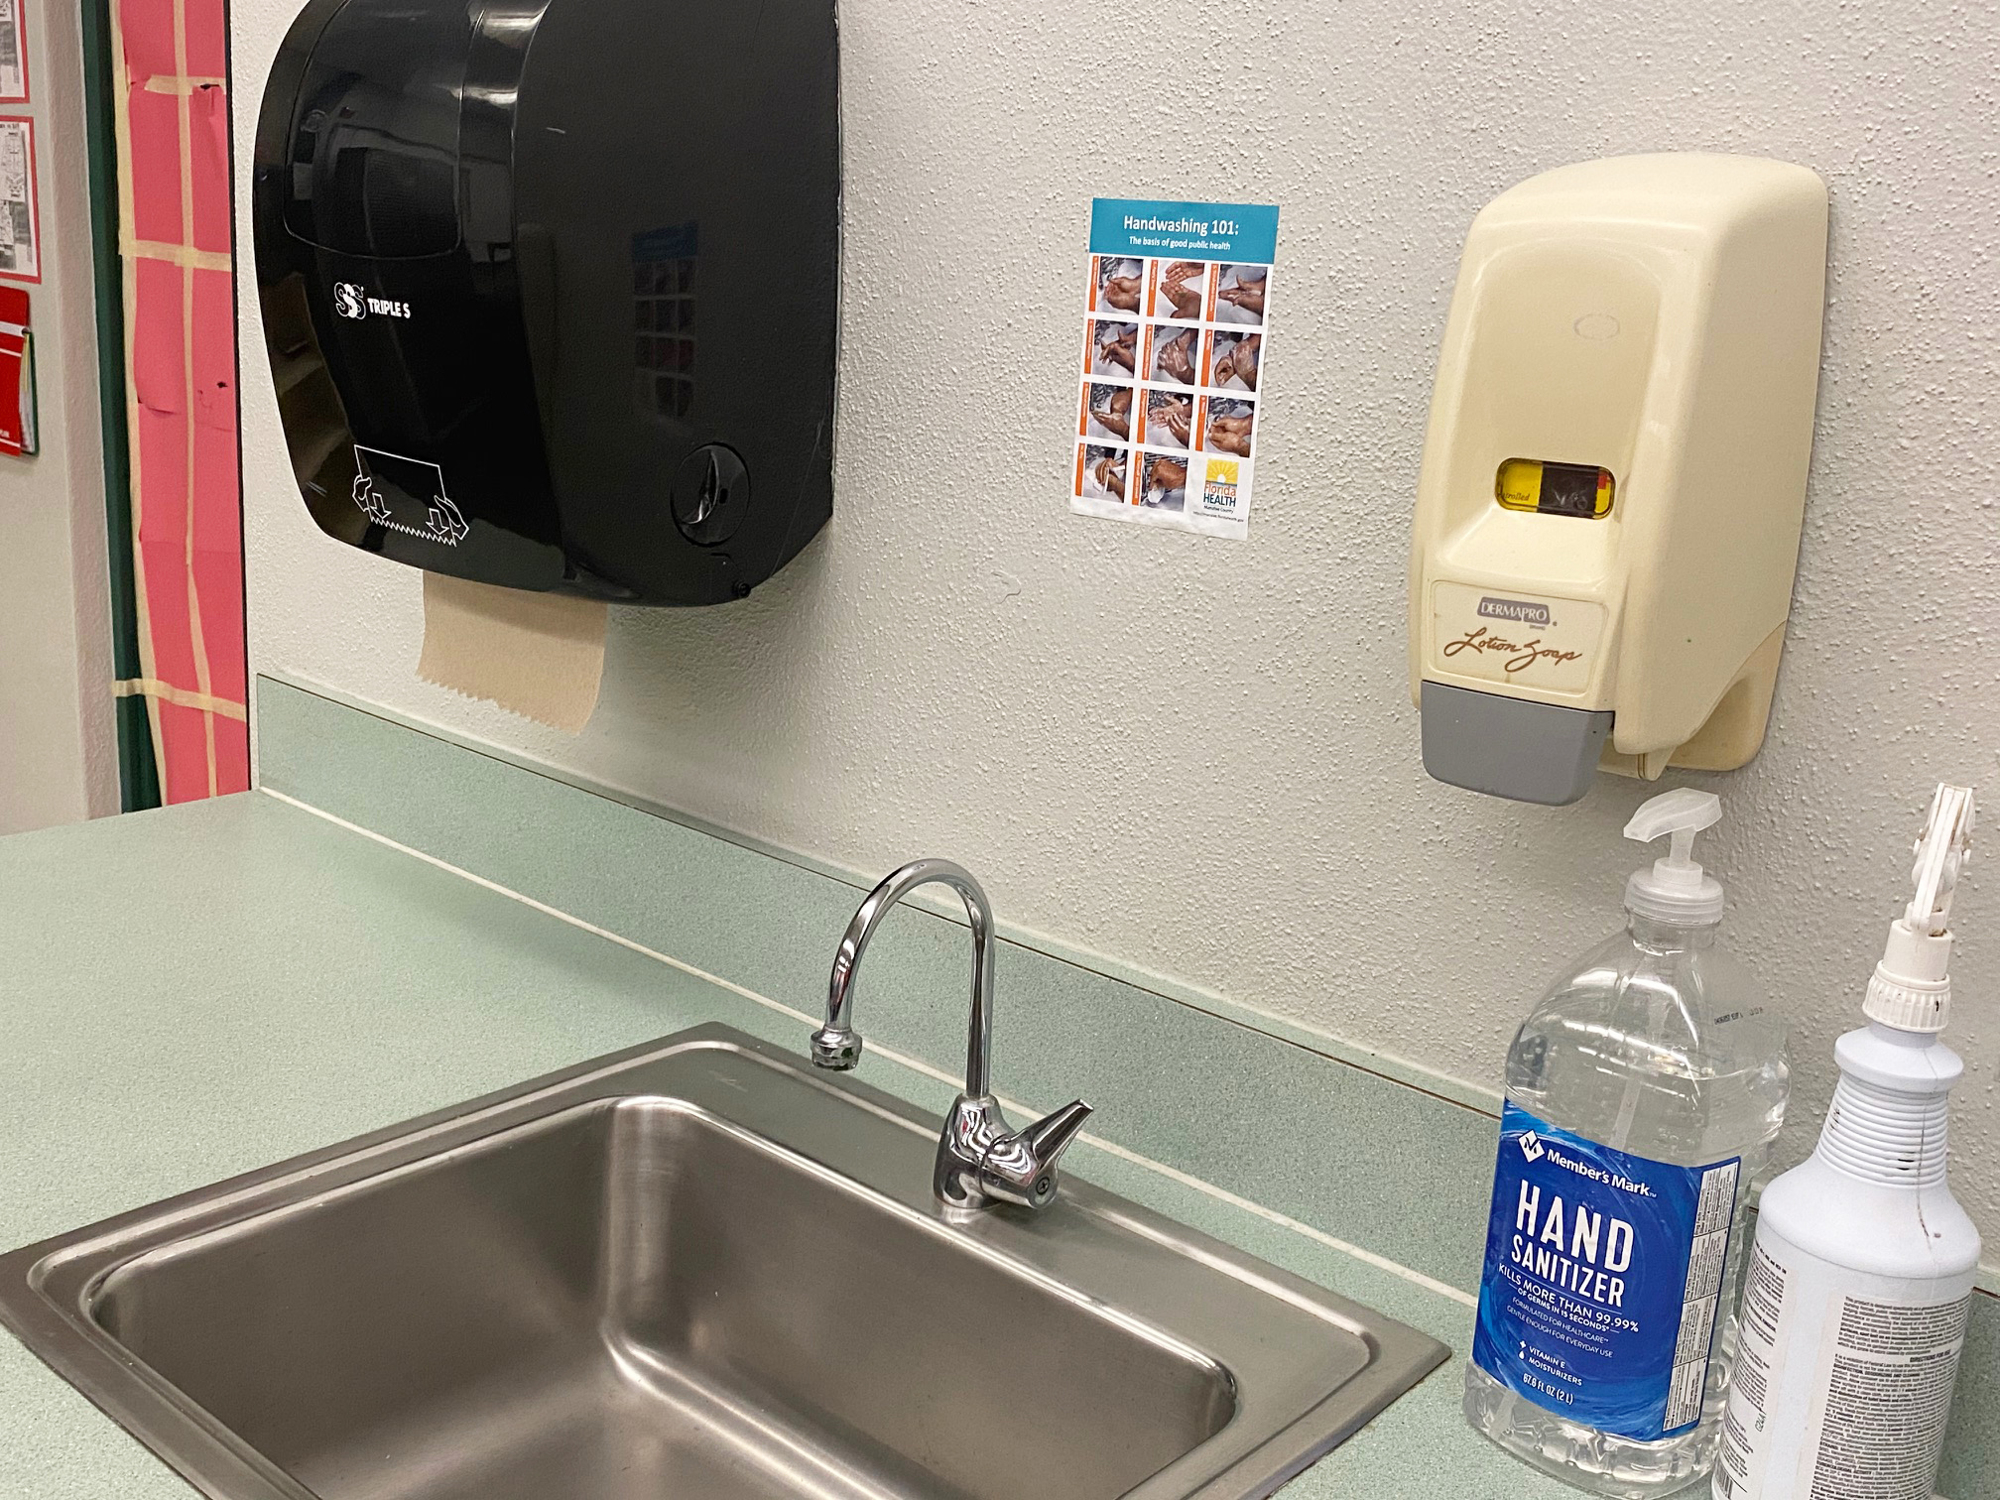 Classrooms are equipped with hand washing stations that have hand soap, paper towels and hand sanitizer. Courtesy photo.